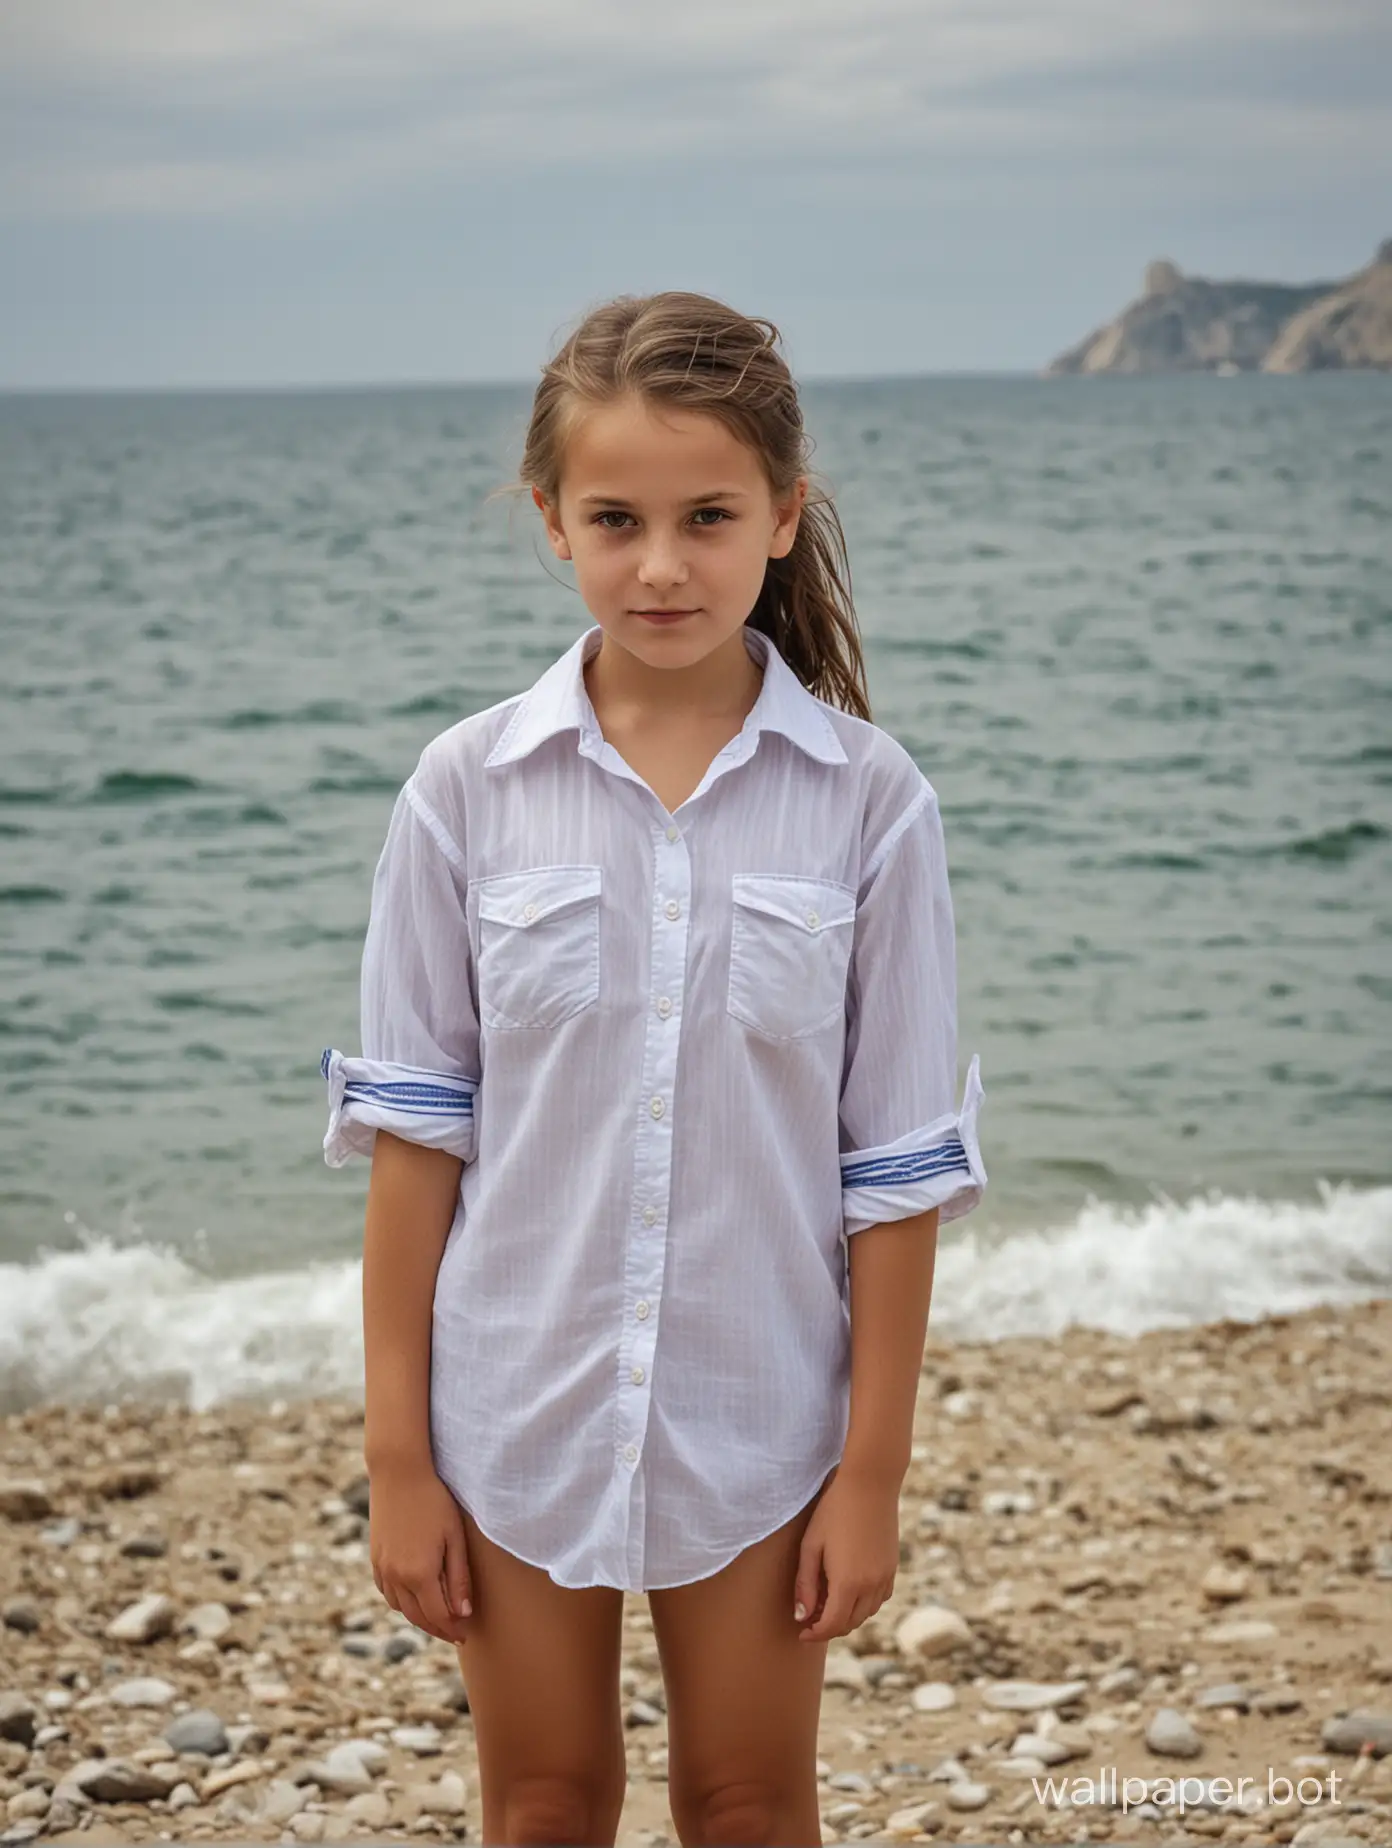 Crimea, seaside, 10-year-old girl, in a shirt on bare skin, posing, people in the background